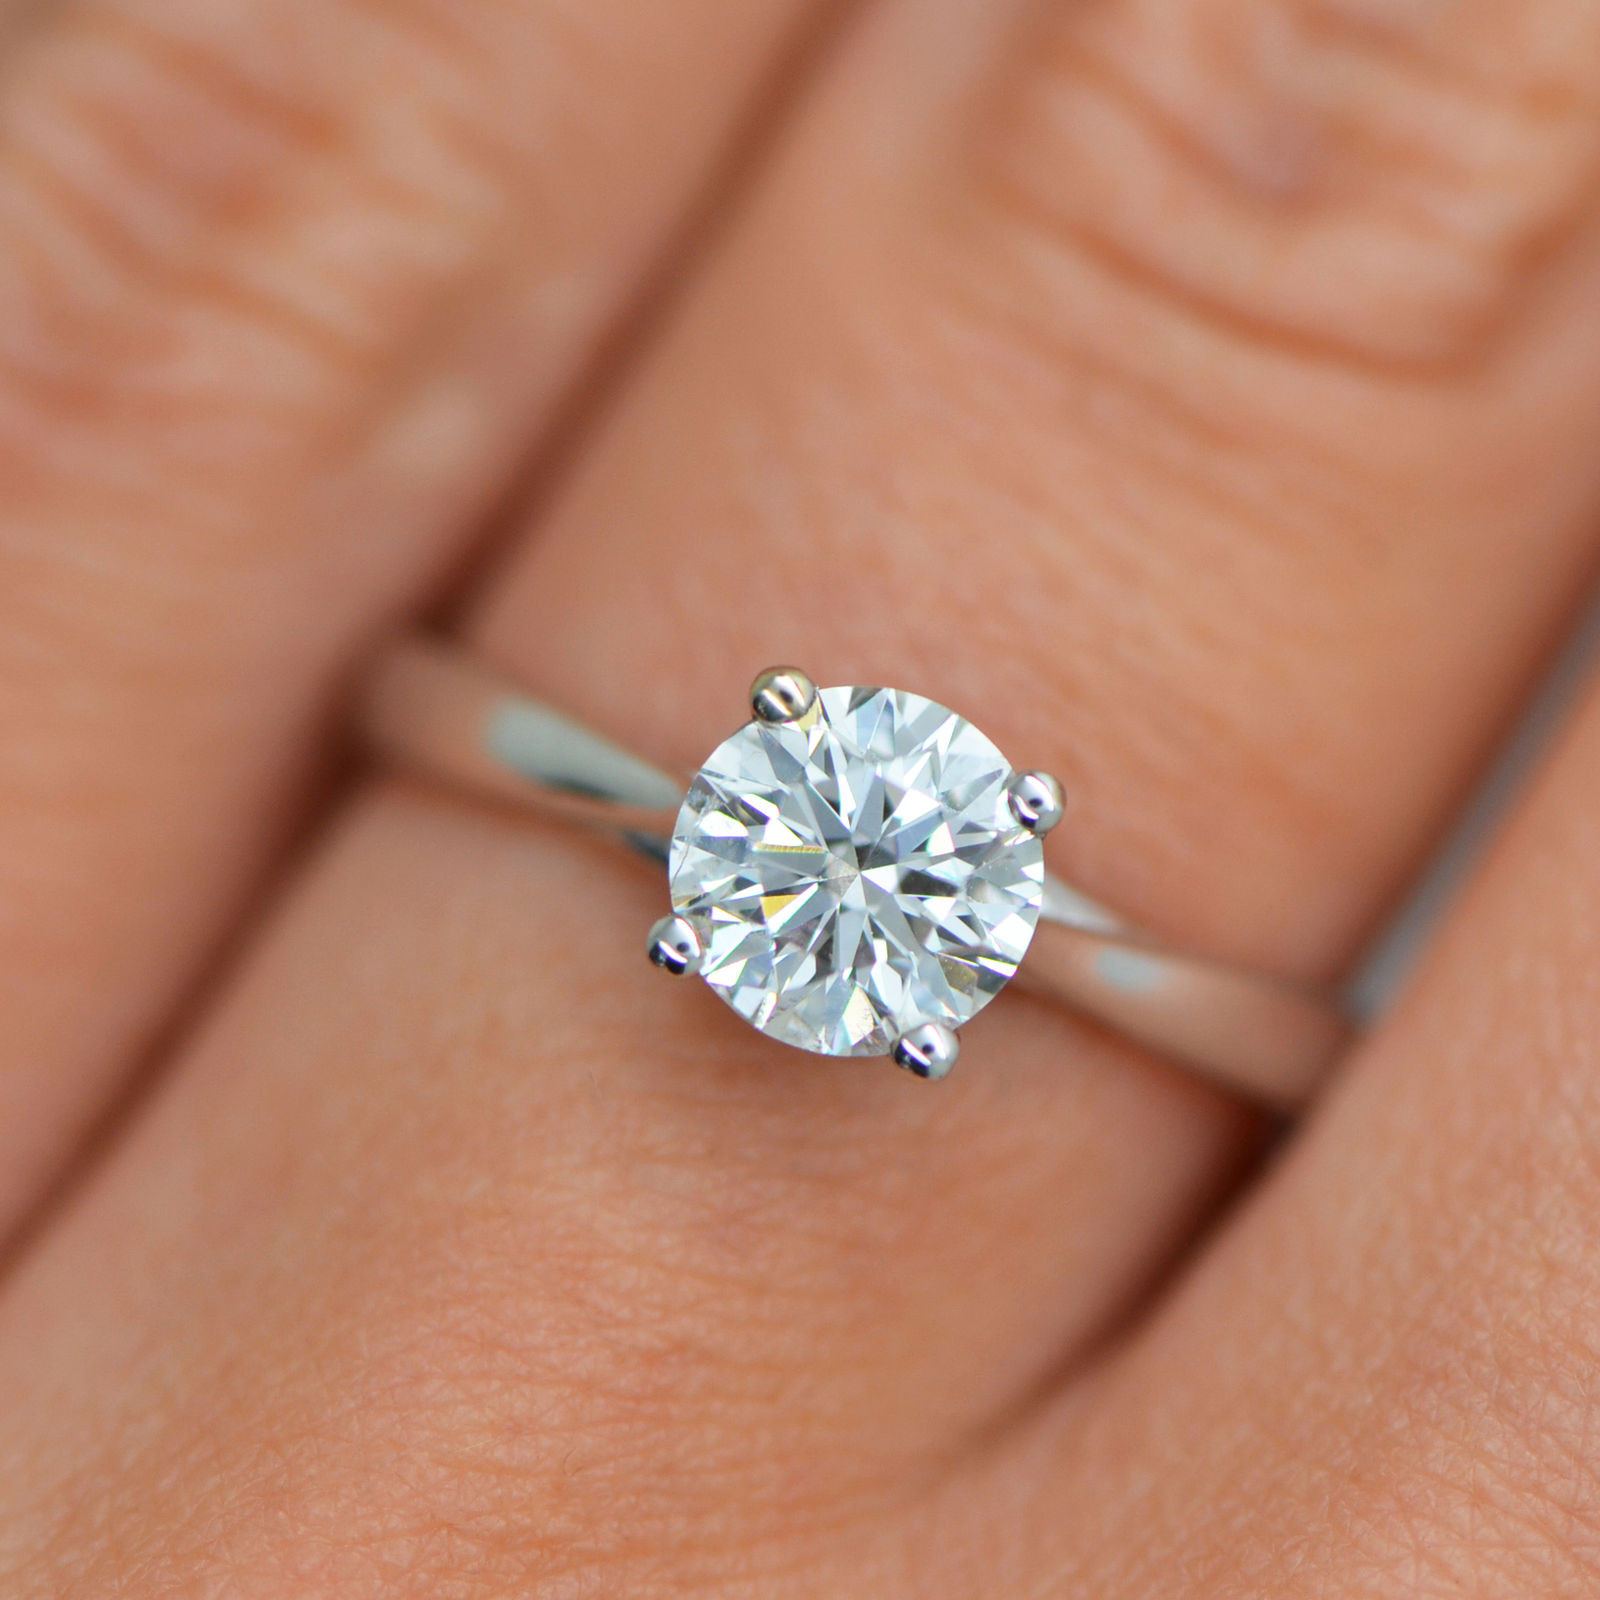 Why 1 Carat Diamond is Best Engagement Ring